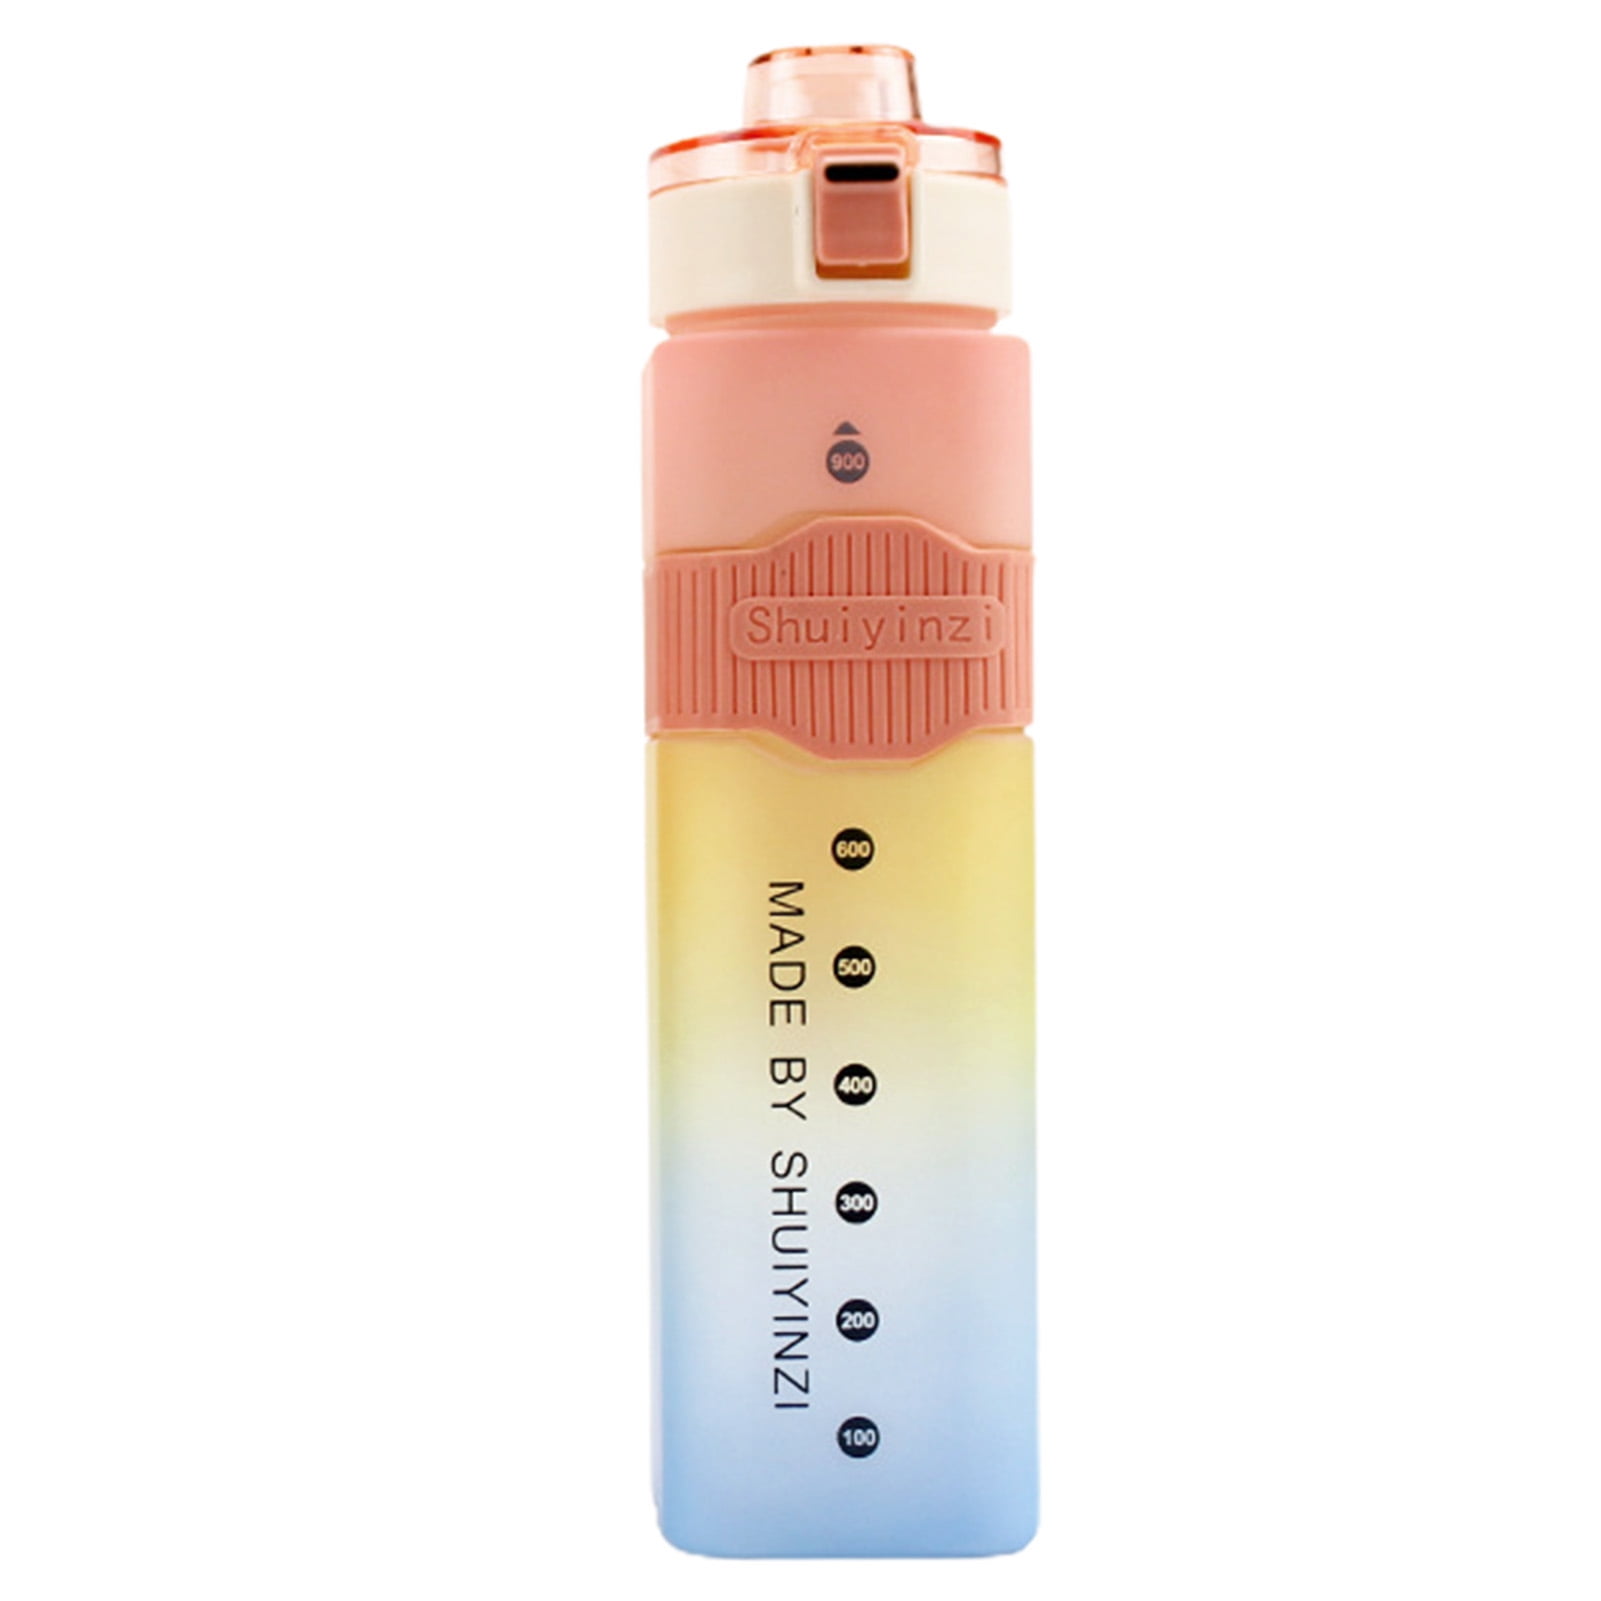 Hesroicy 250ml Straw Bottle with Lanyard Cute Design Portable